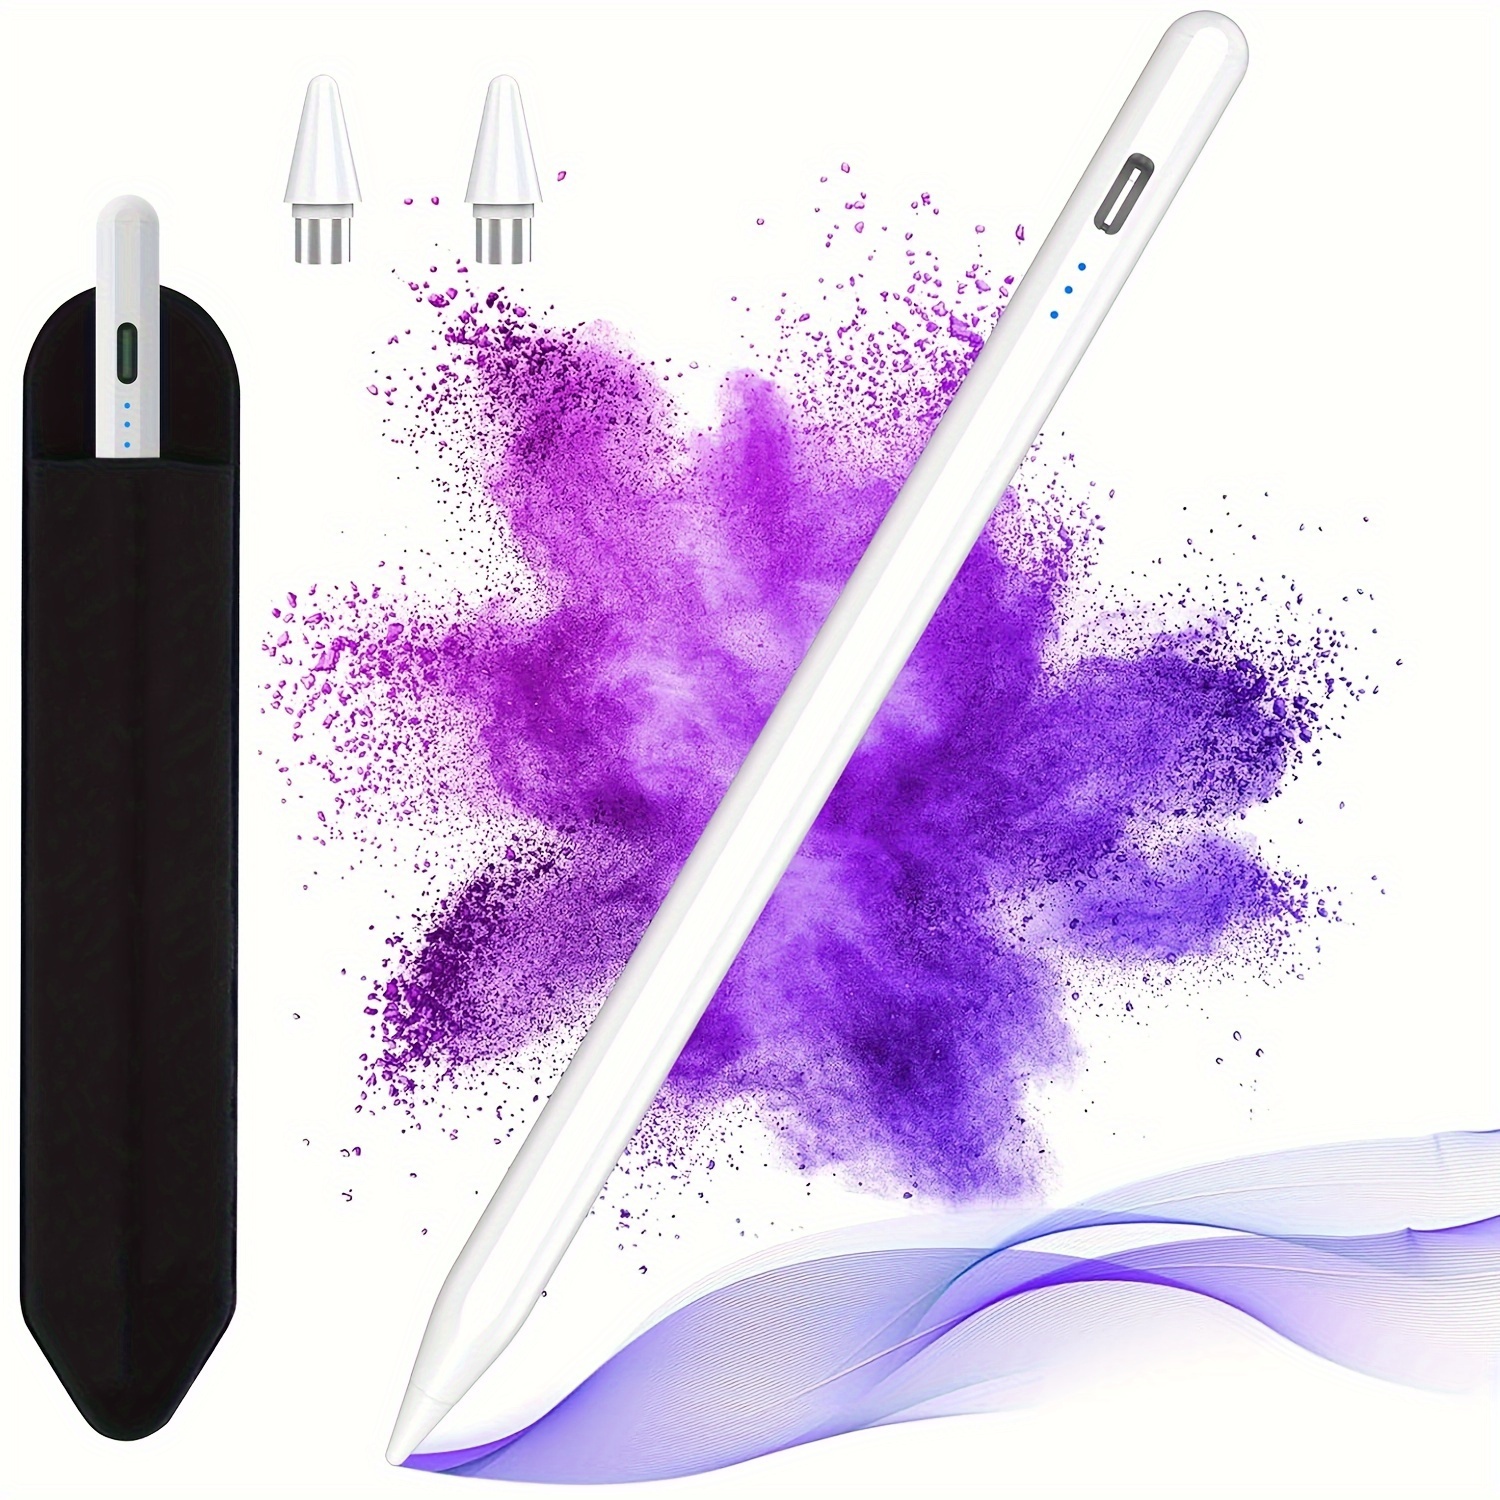 

Stylus Pen For Touch Screen, 15 Mins Fast Charge Stylus Pen For Samsung/tablet/phone, Android/ios, High Precision Magnetic Universal Stylus Pencil For All Capacitive Touch Screen (white)